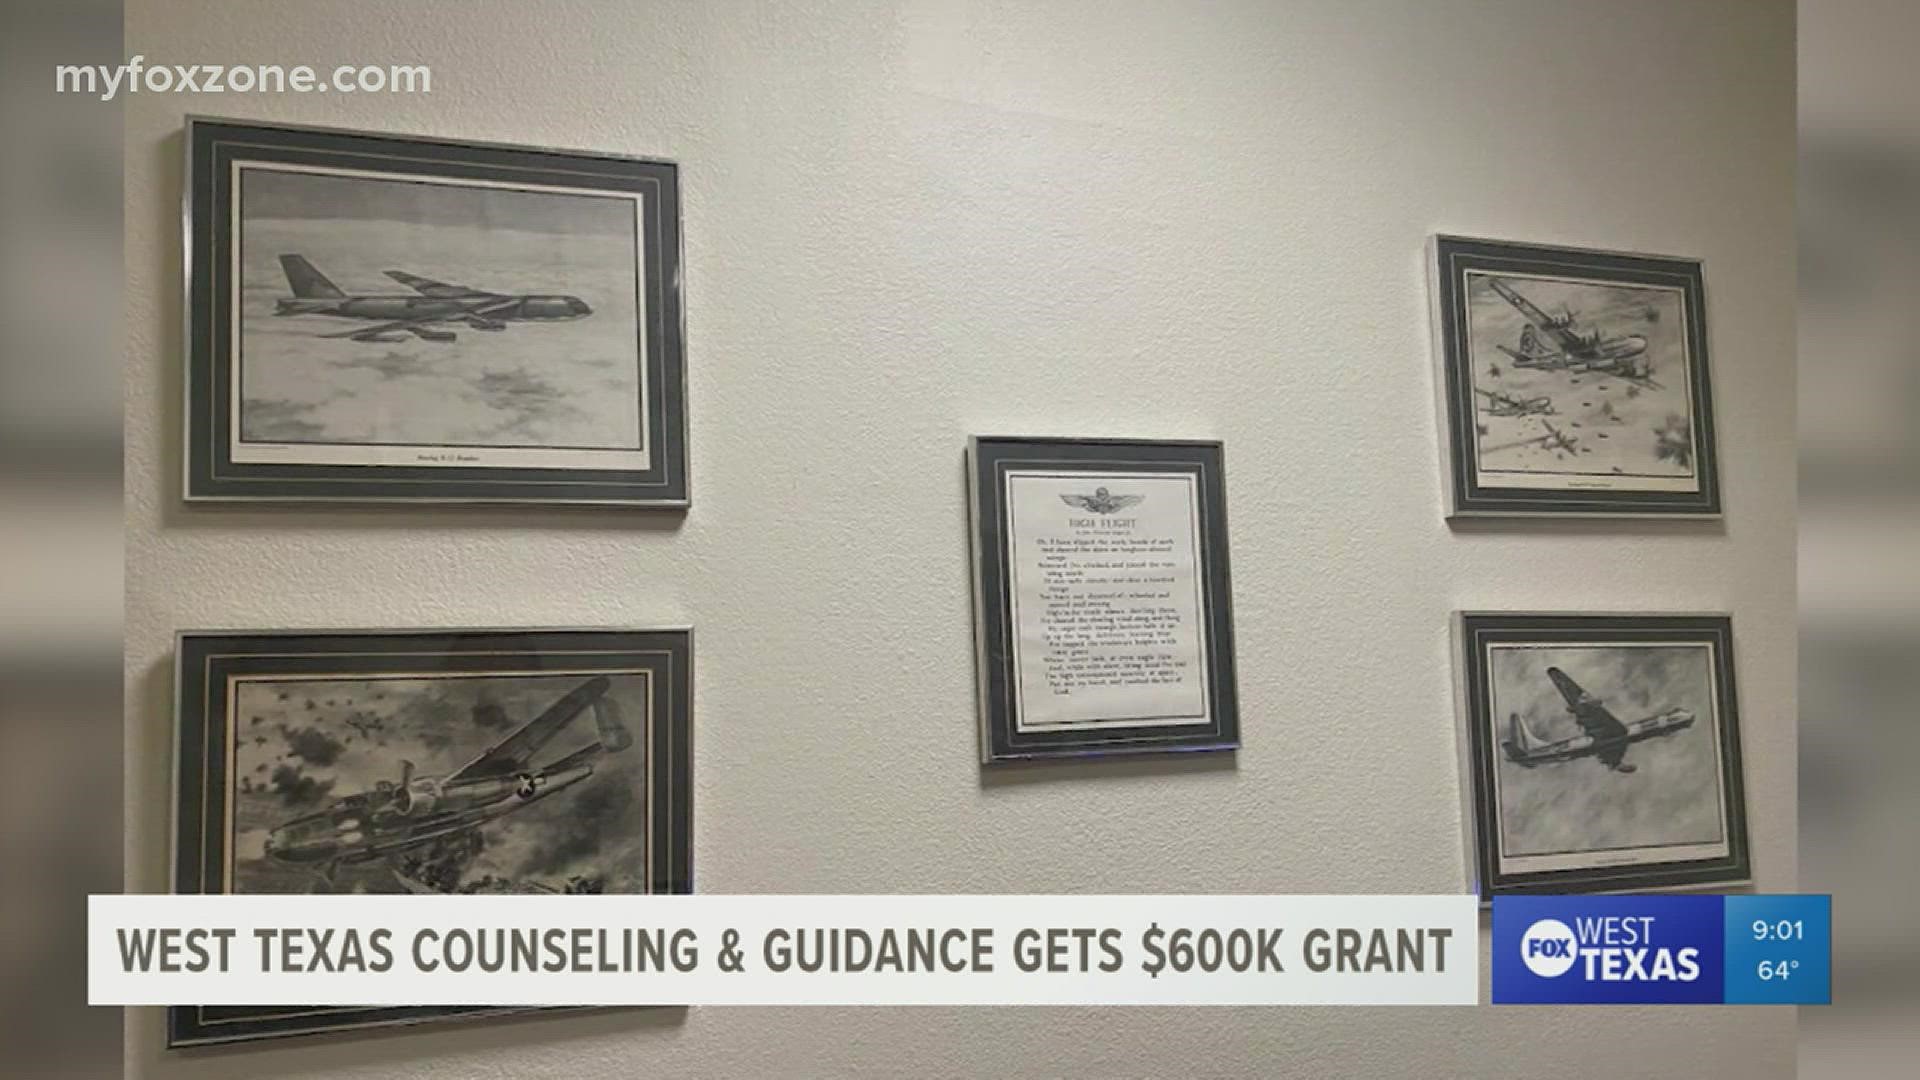 The San Angelo Health Foundation awarded West Texas Counseling & Guidance $600,000. A third of the funds will be used towards the expansion of the veterans program.